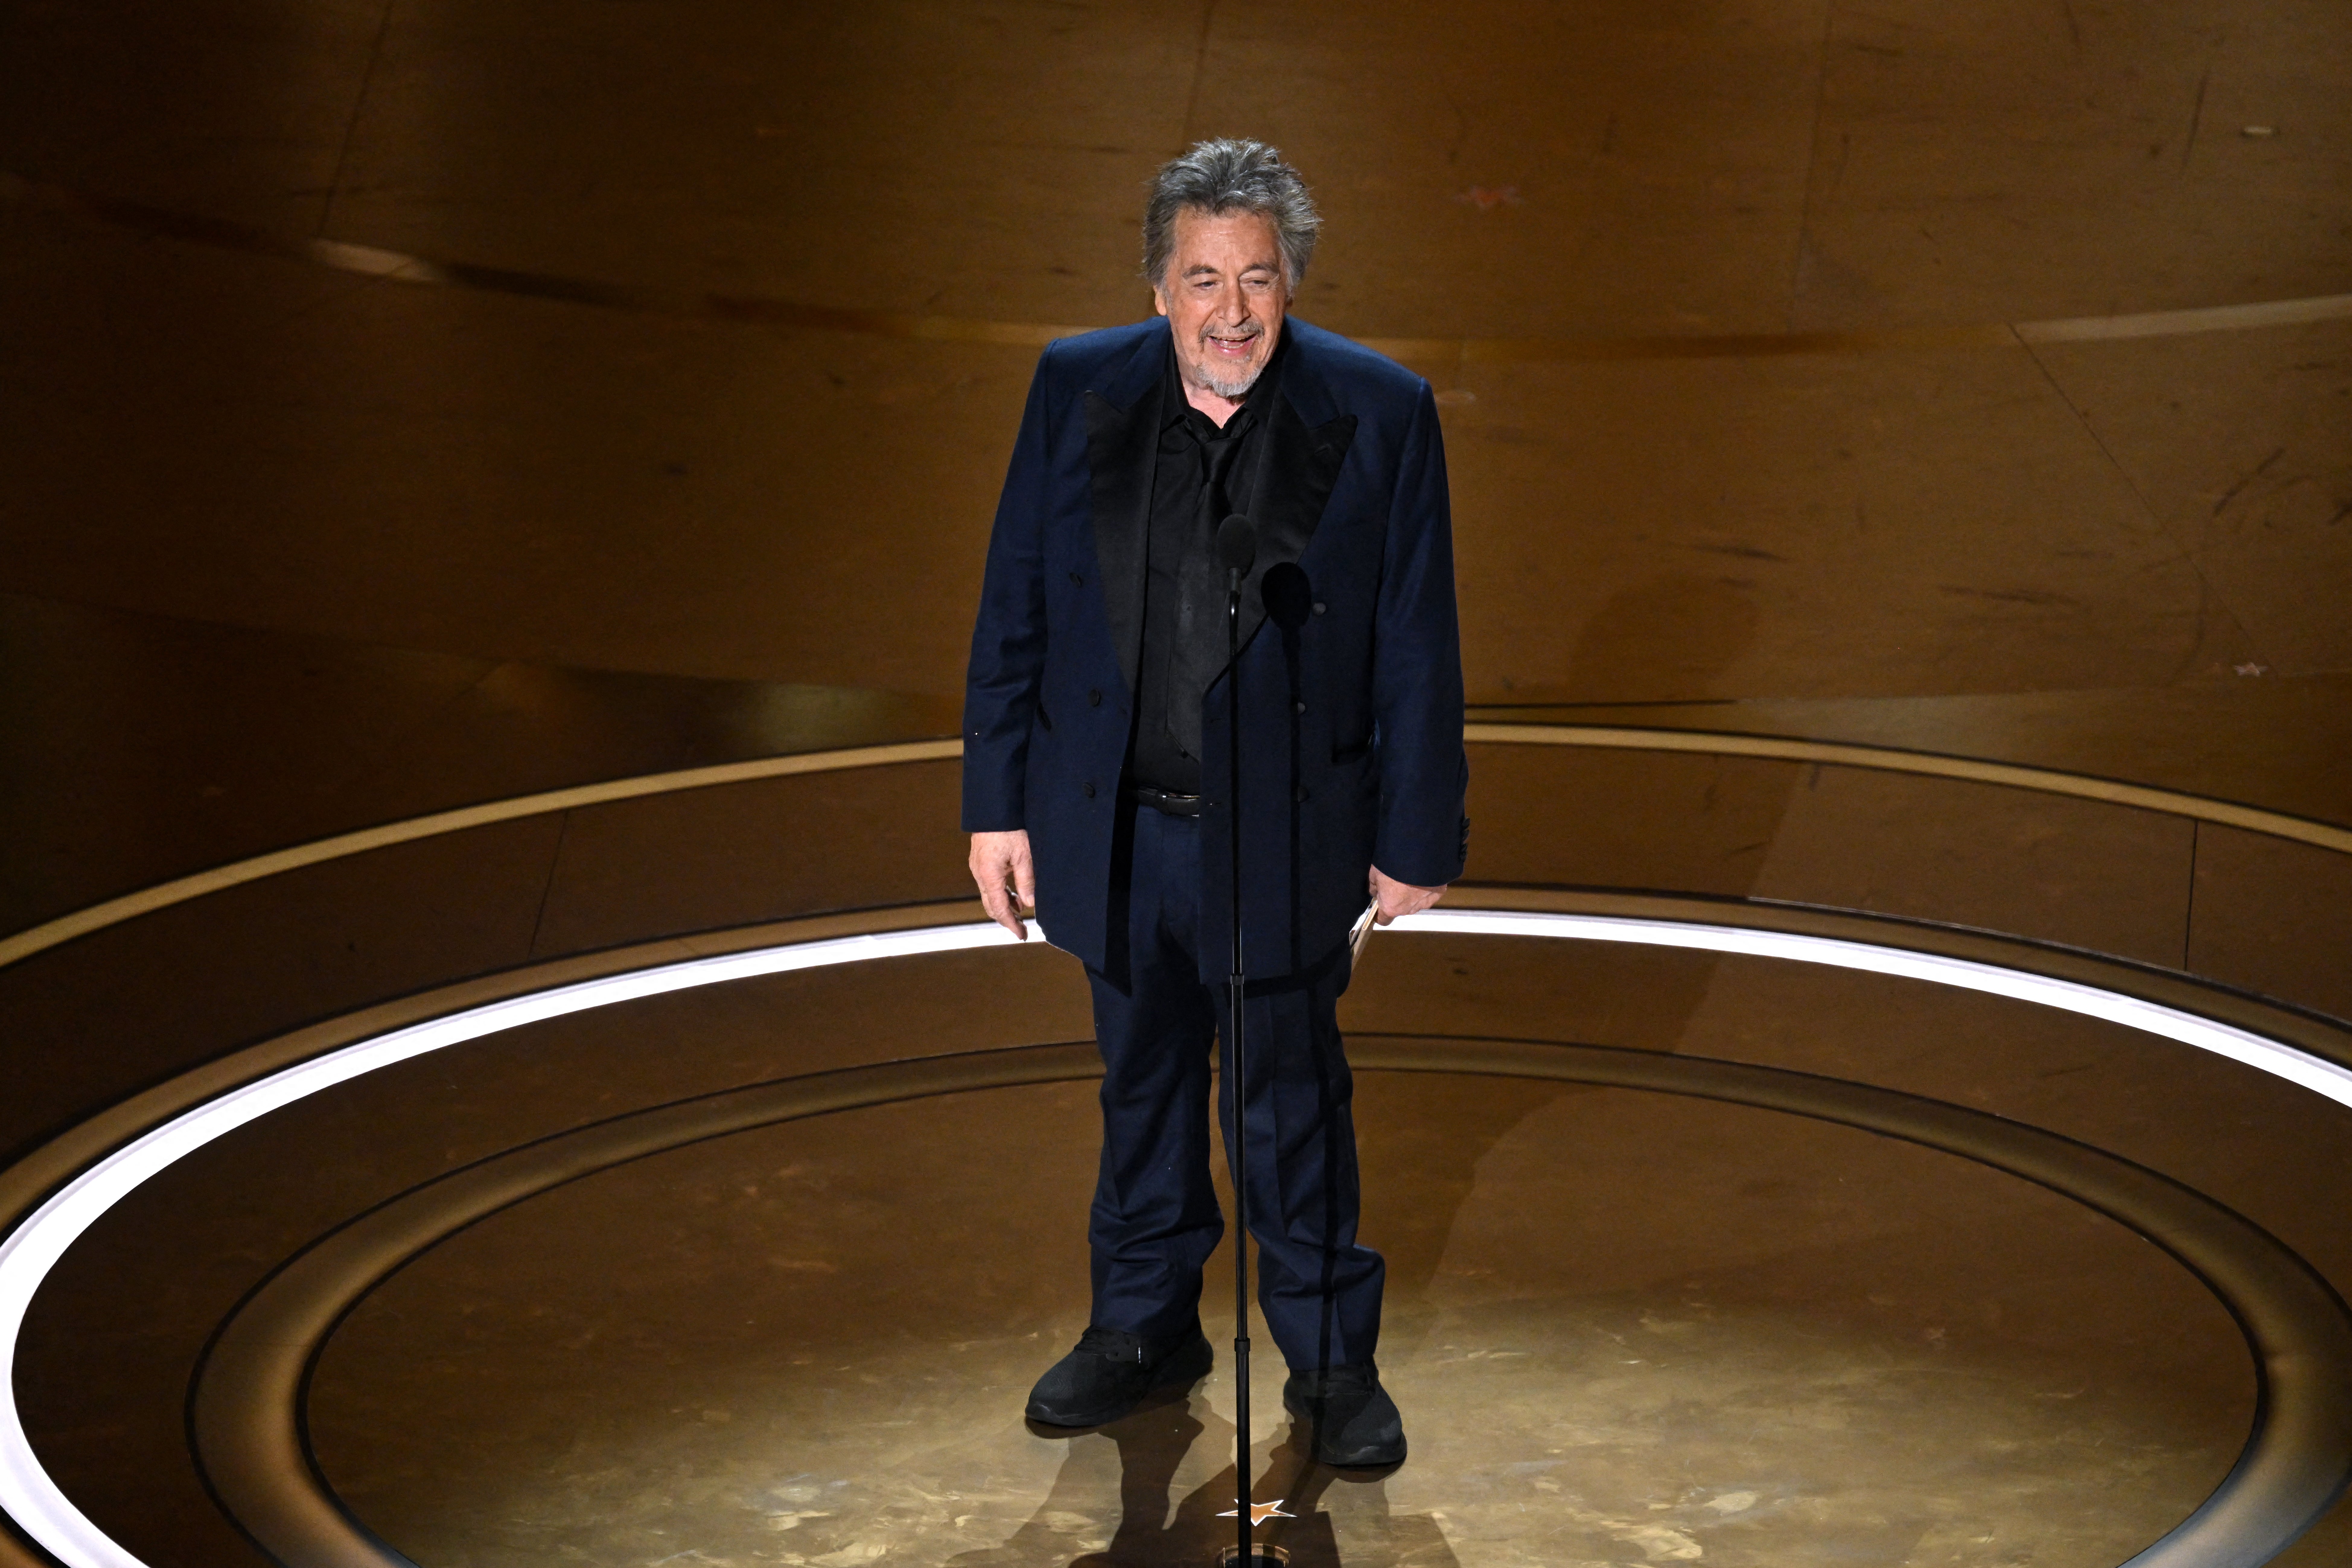 Al Pacino was actually the person to announce Best Picture, despite what Mr Trump thinks